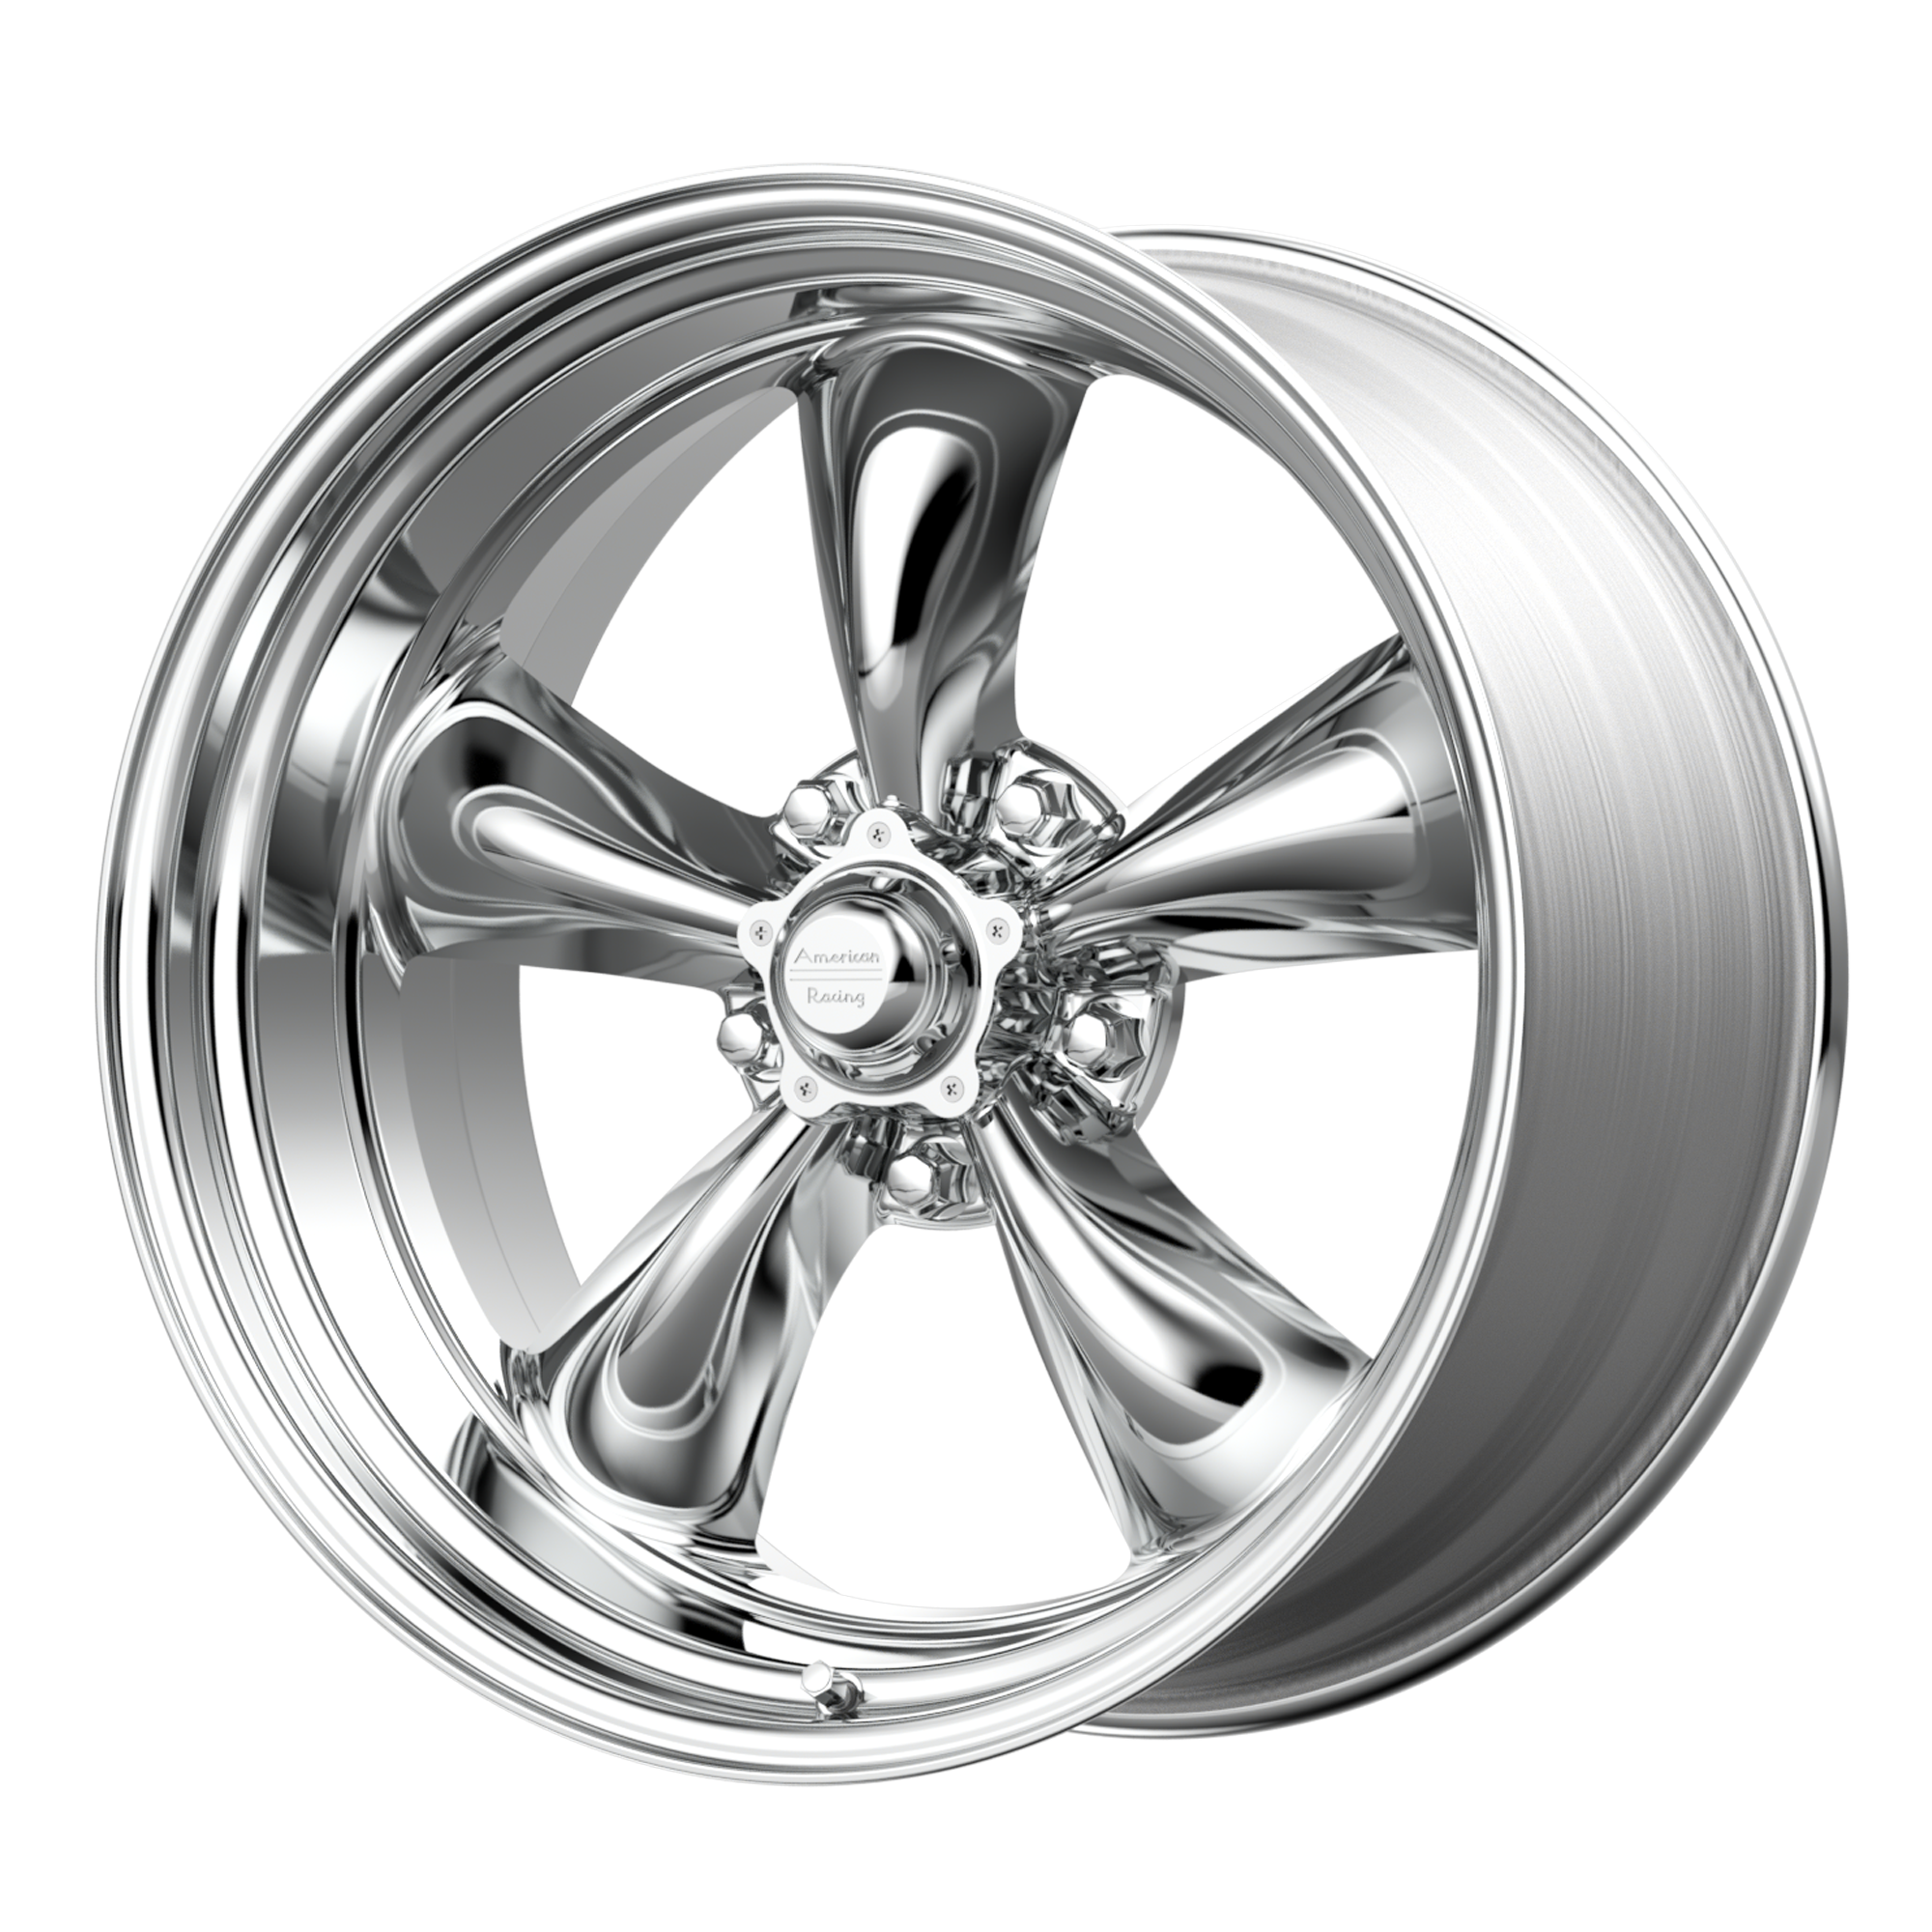 TORQ THRUST II 1 PC 15x7 5x120.65 POLISHED (-6 mm) - Tires and Engine Performance